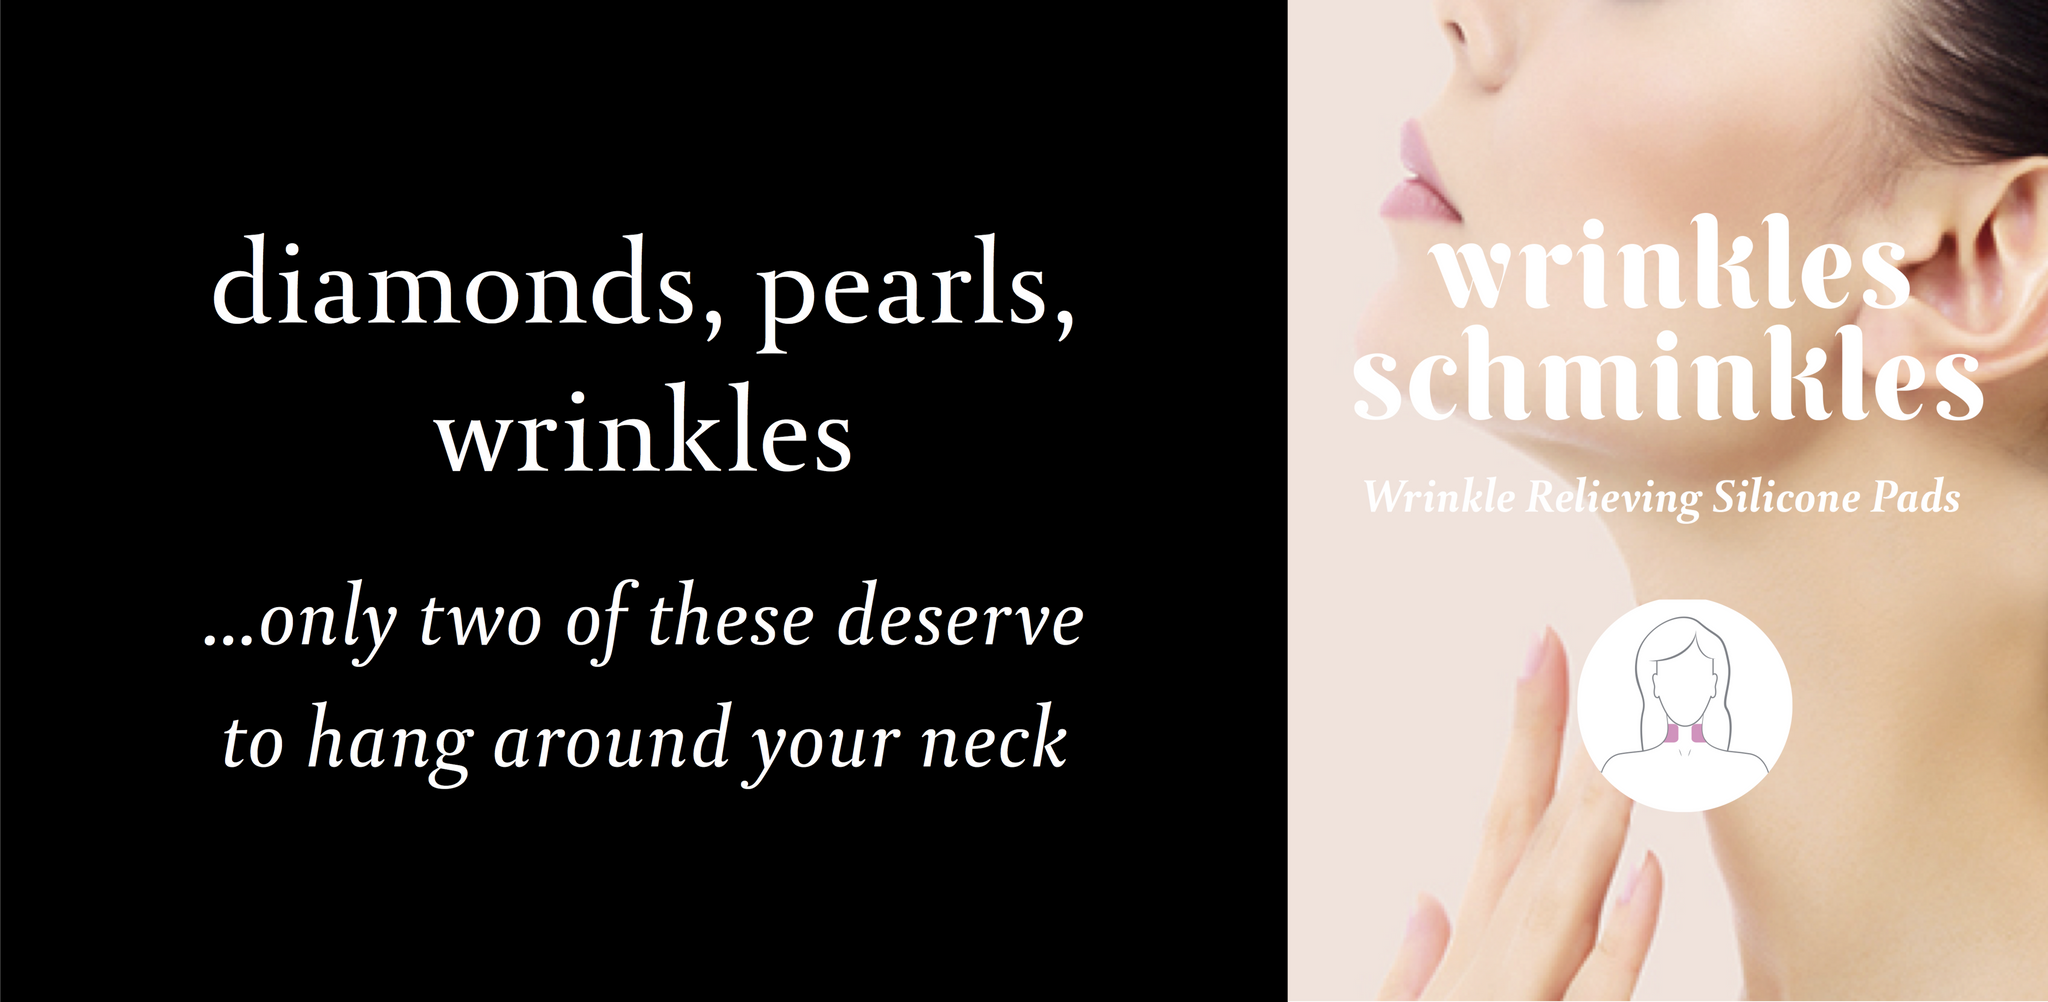 Wrinkles Schminkles Reusable Neck Silicone Pad. Wrinkles Schminkles Neck Smoothing Kit